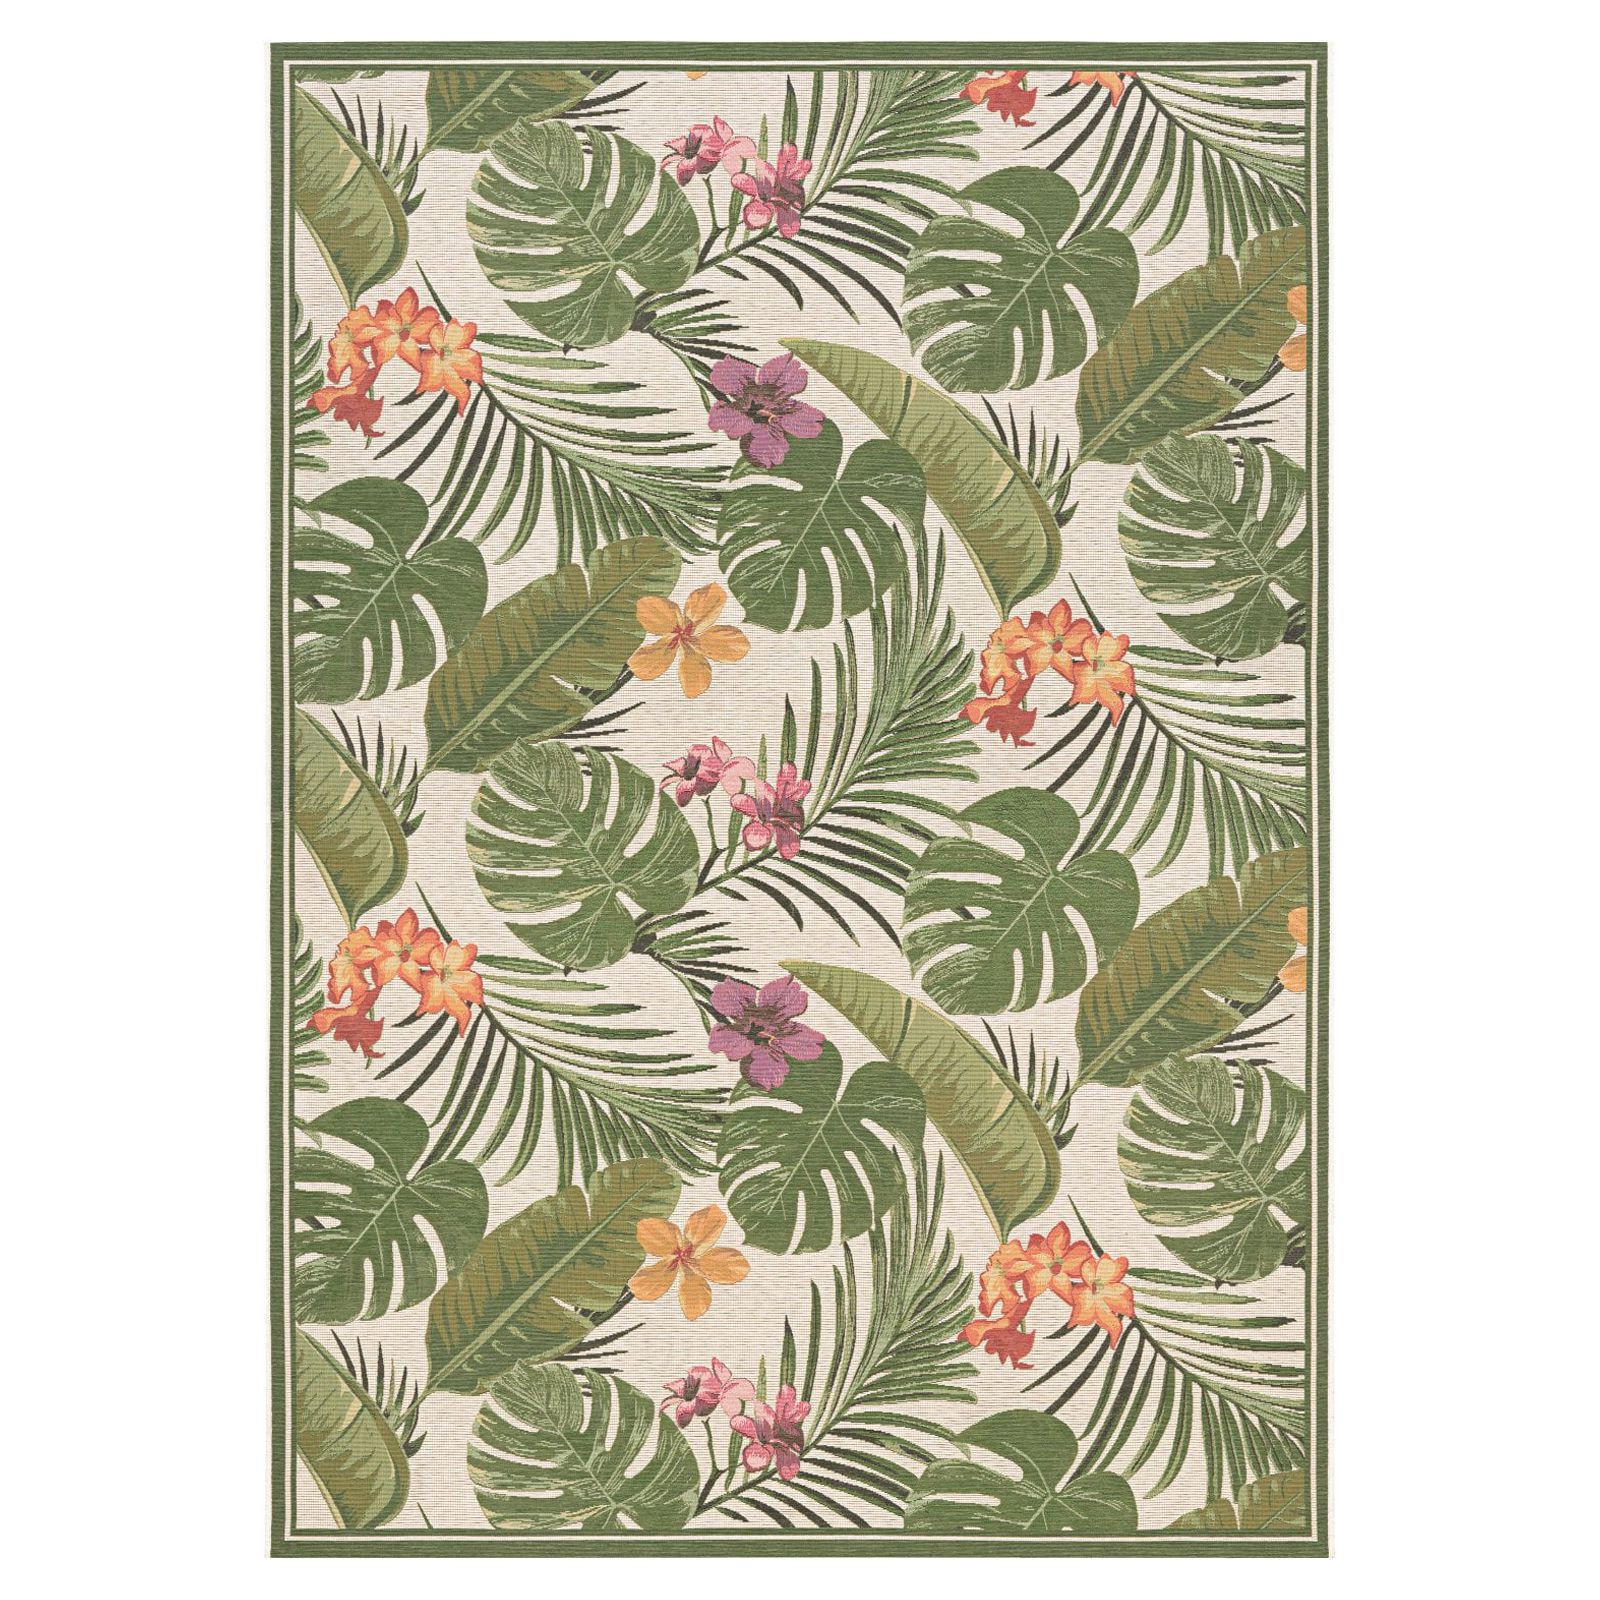 Couristan Dolce Flowering Fern Indoor / Outdoor Area Rug, Ivory-Hunter Green, 5'3" x 7'6" - image 1 of 6